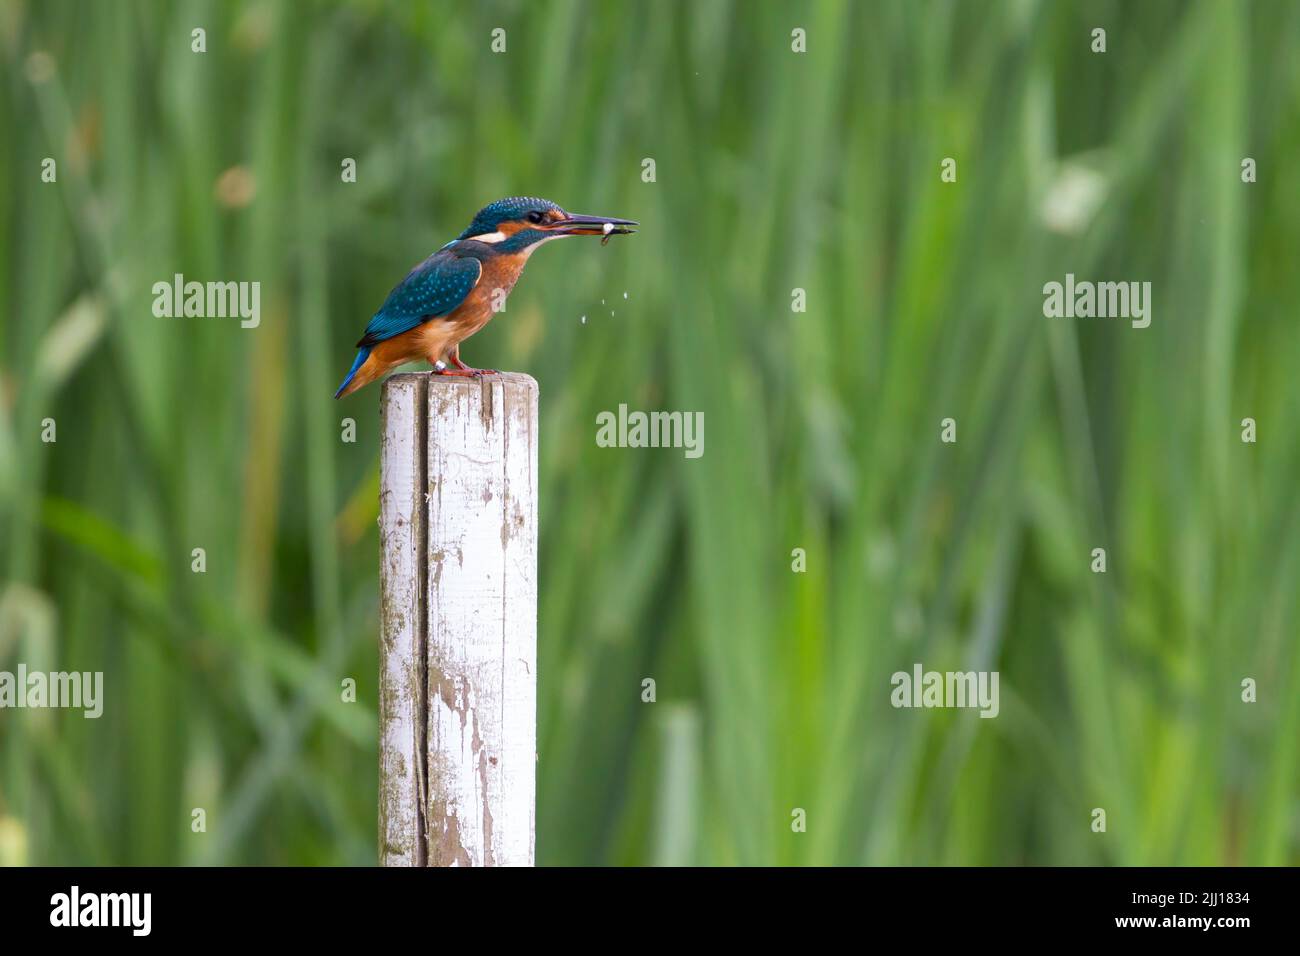 Kingfisher on post with reeds in background (alcedo atthis) electric blue and orange colours a little muted in shade female has orange lower bill Stock Photo